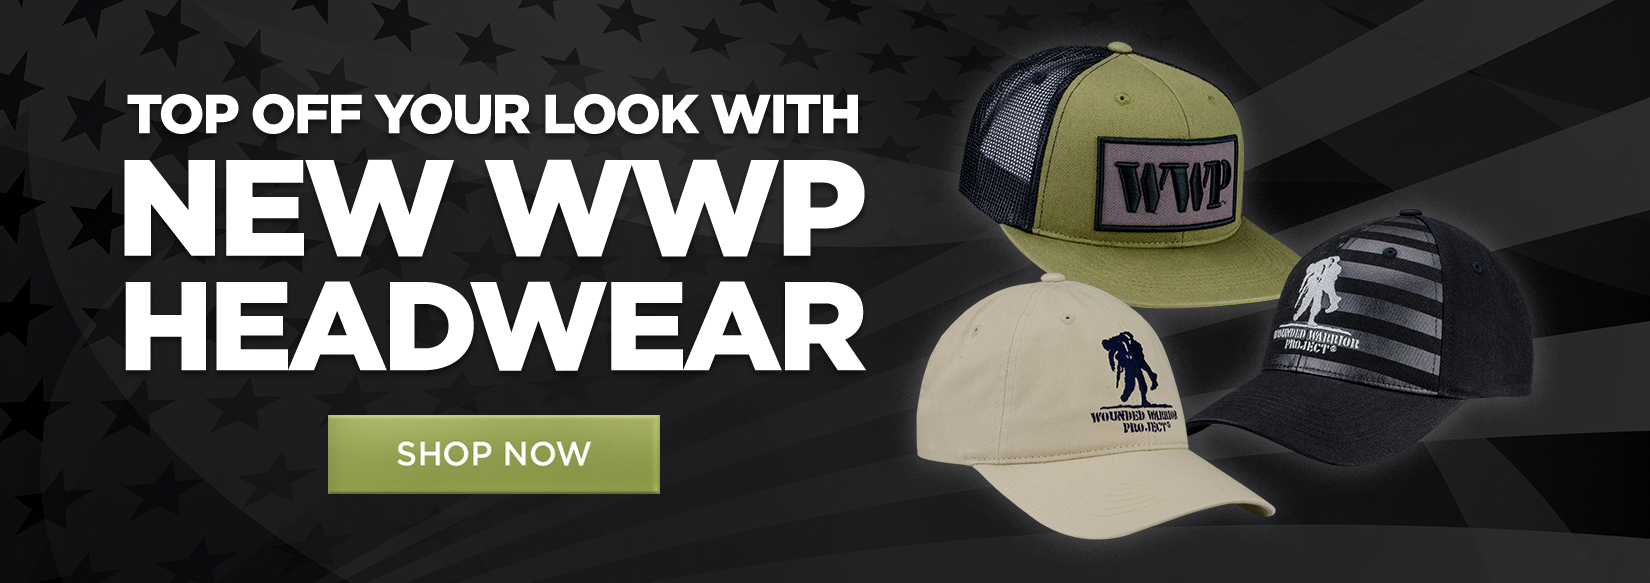 Top off Your Look With New WWP Headwear - SHOP NOW